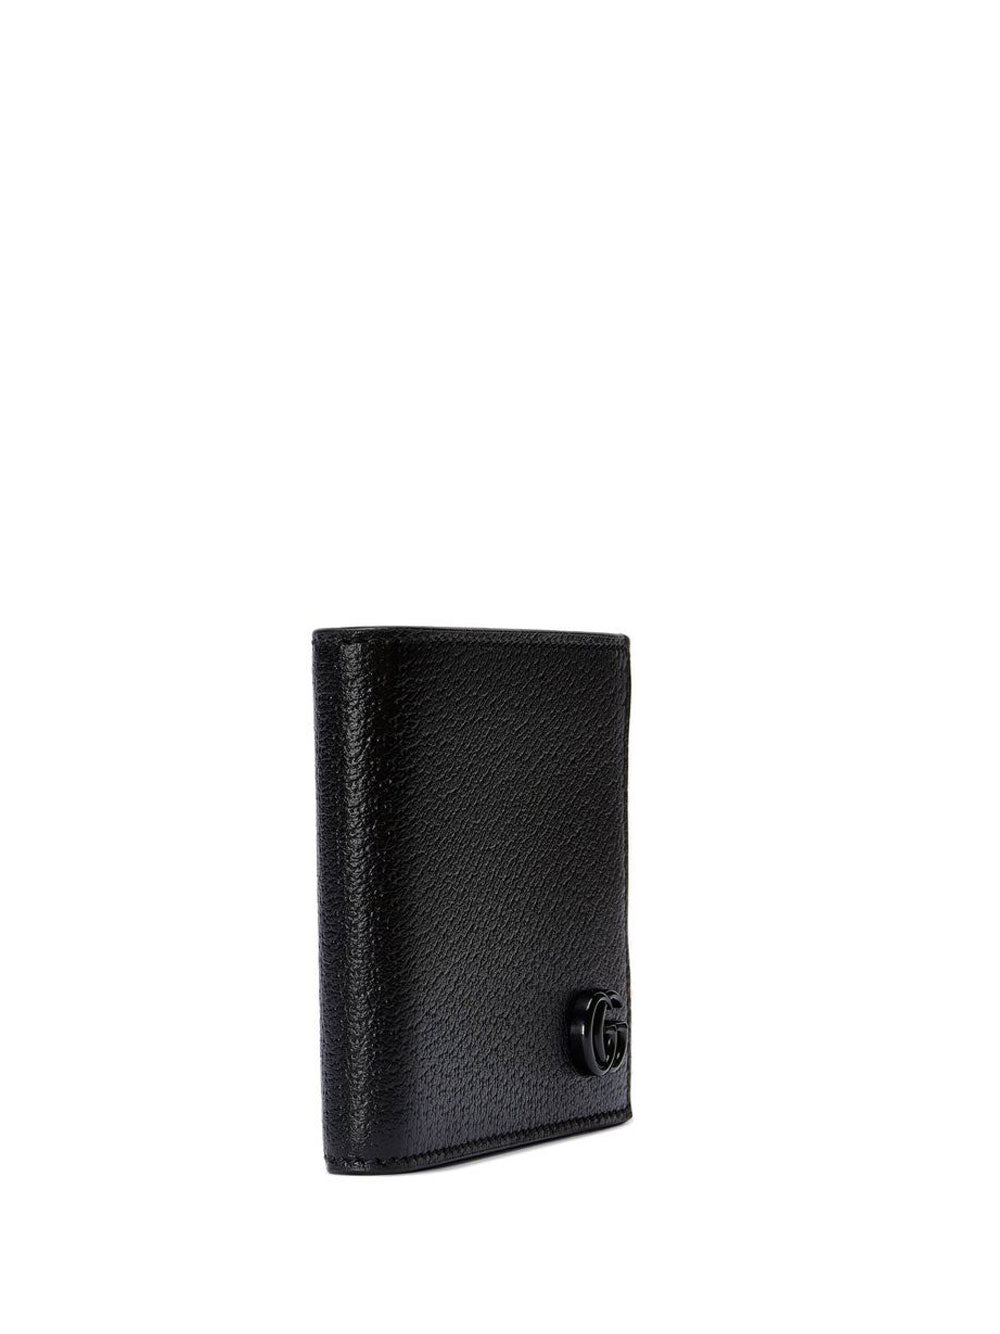 GG Marmont foldover wallet